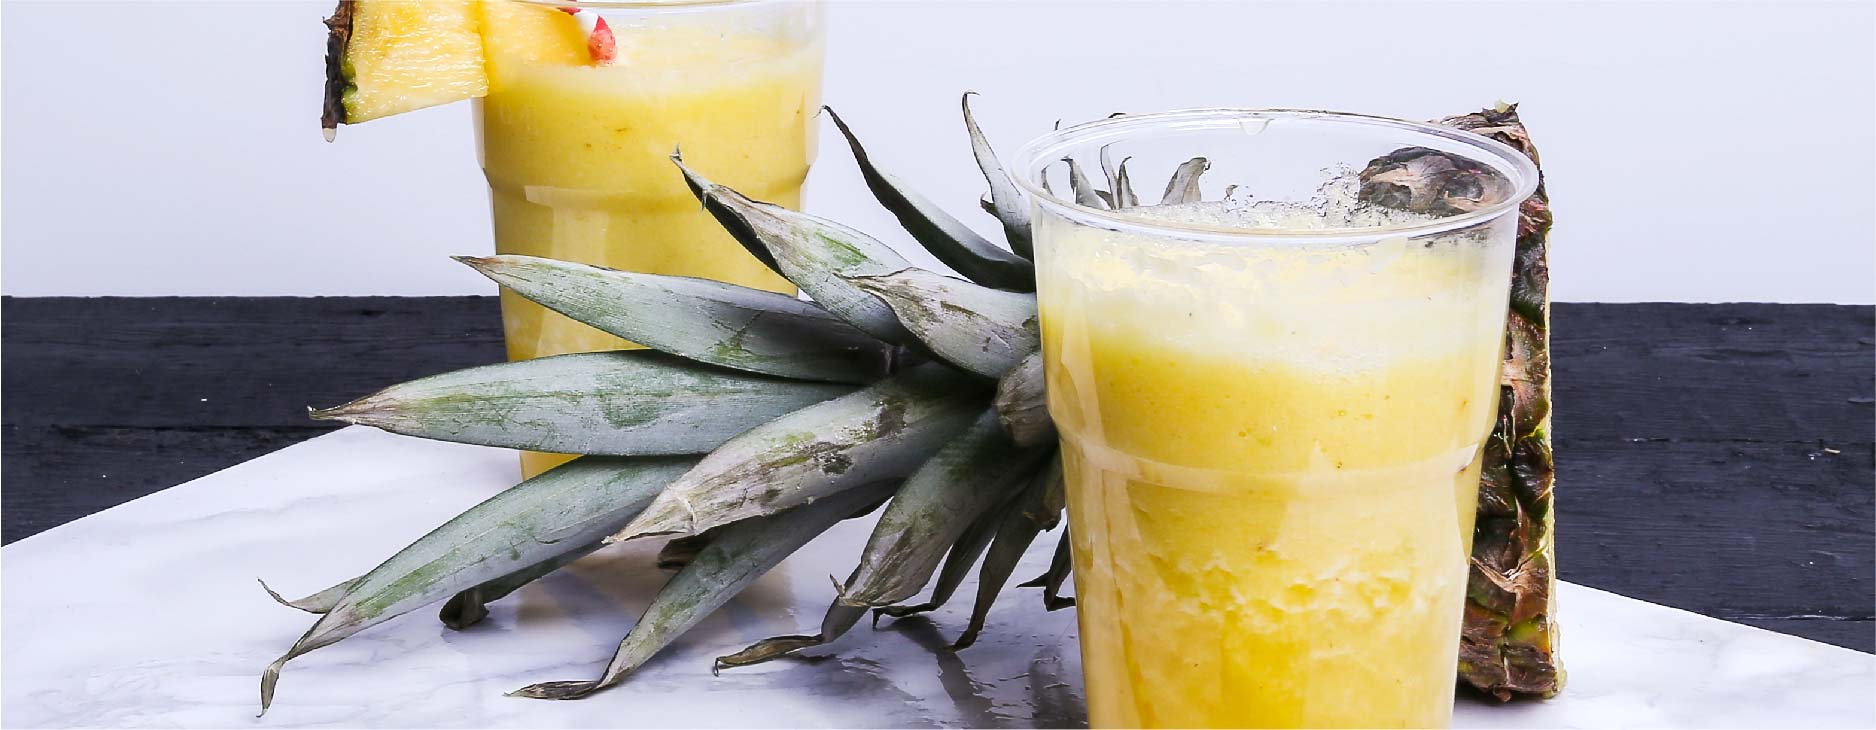 Pineapple juice may reduce the symptoms after wisdom teeth removal